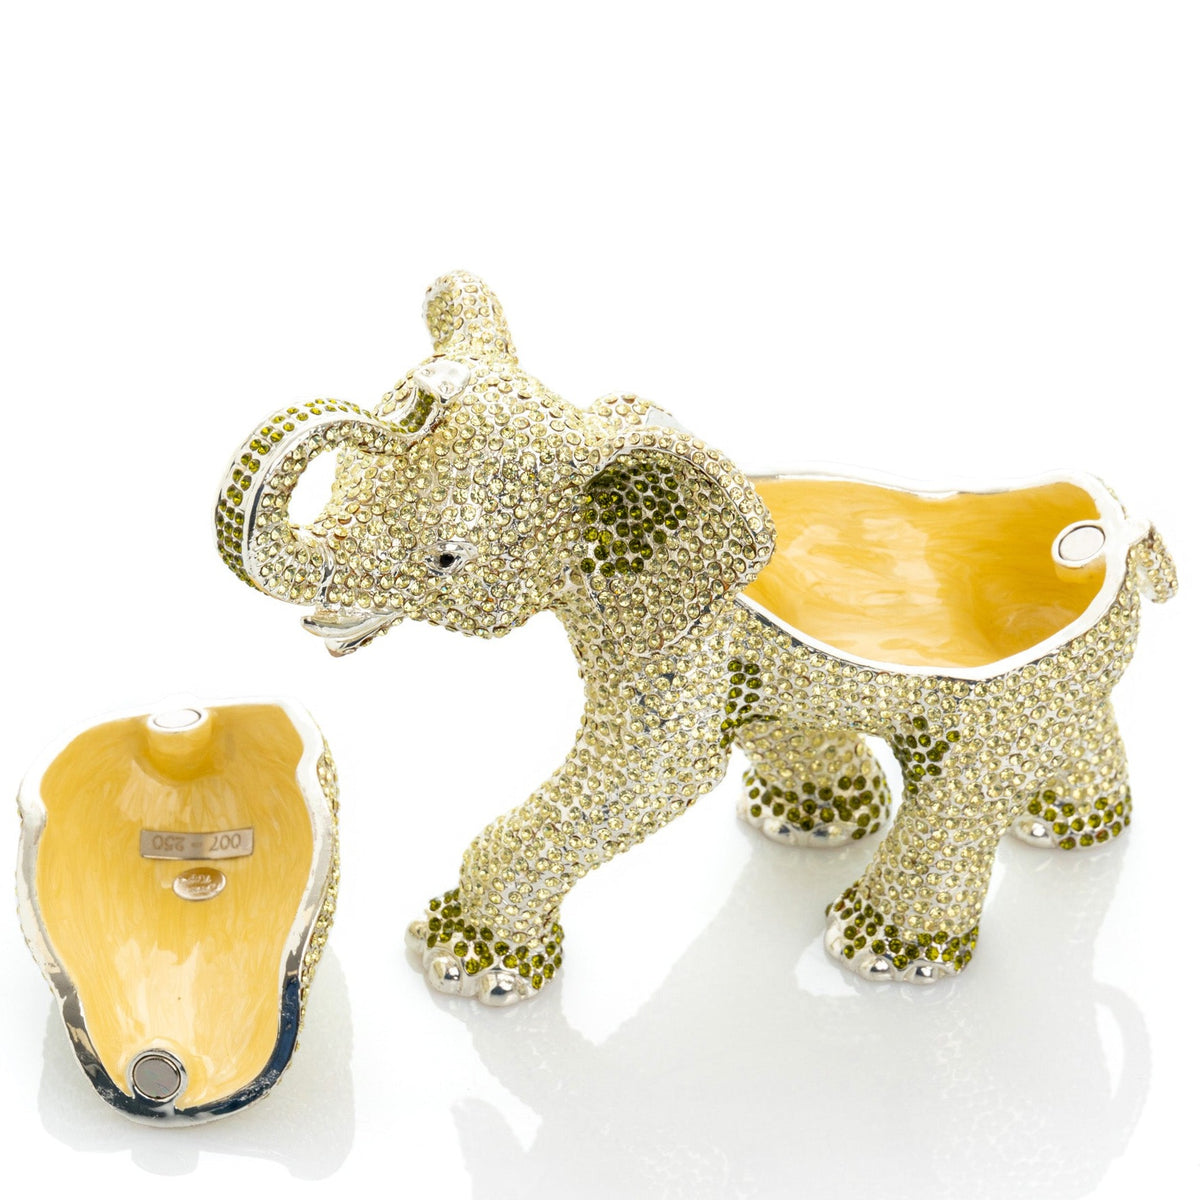 Silver Elephant Limited Edition 1 of 250